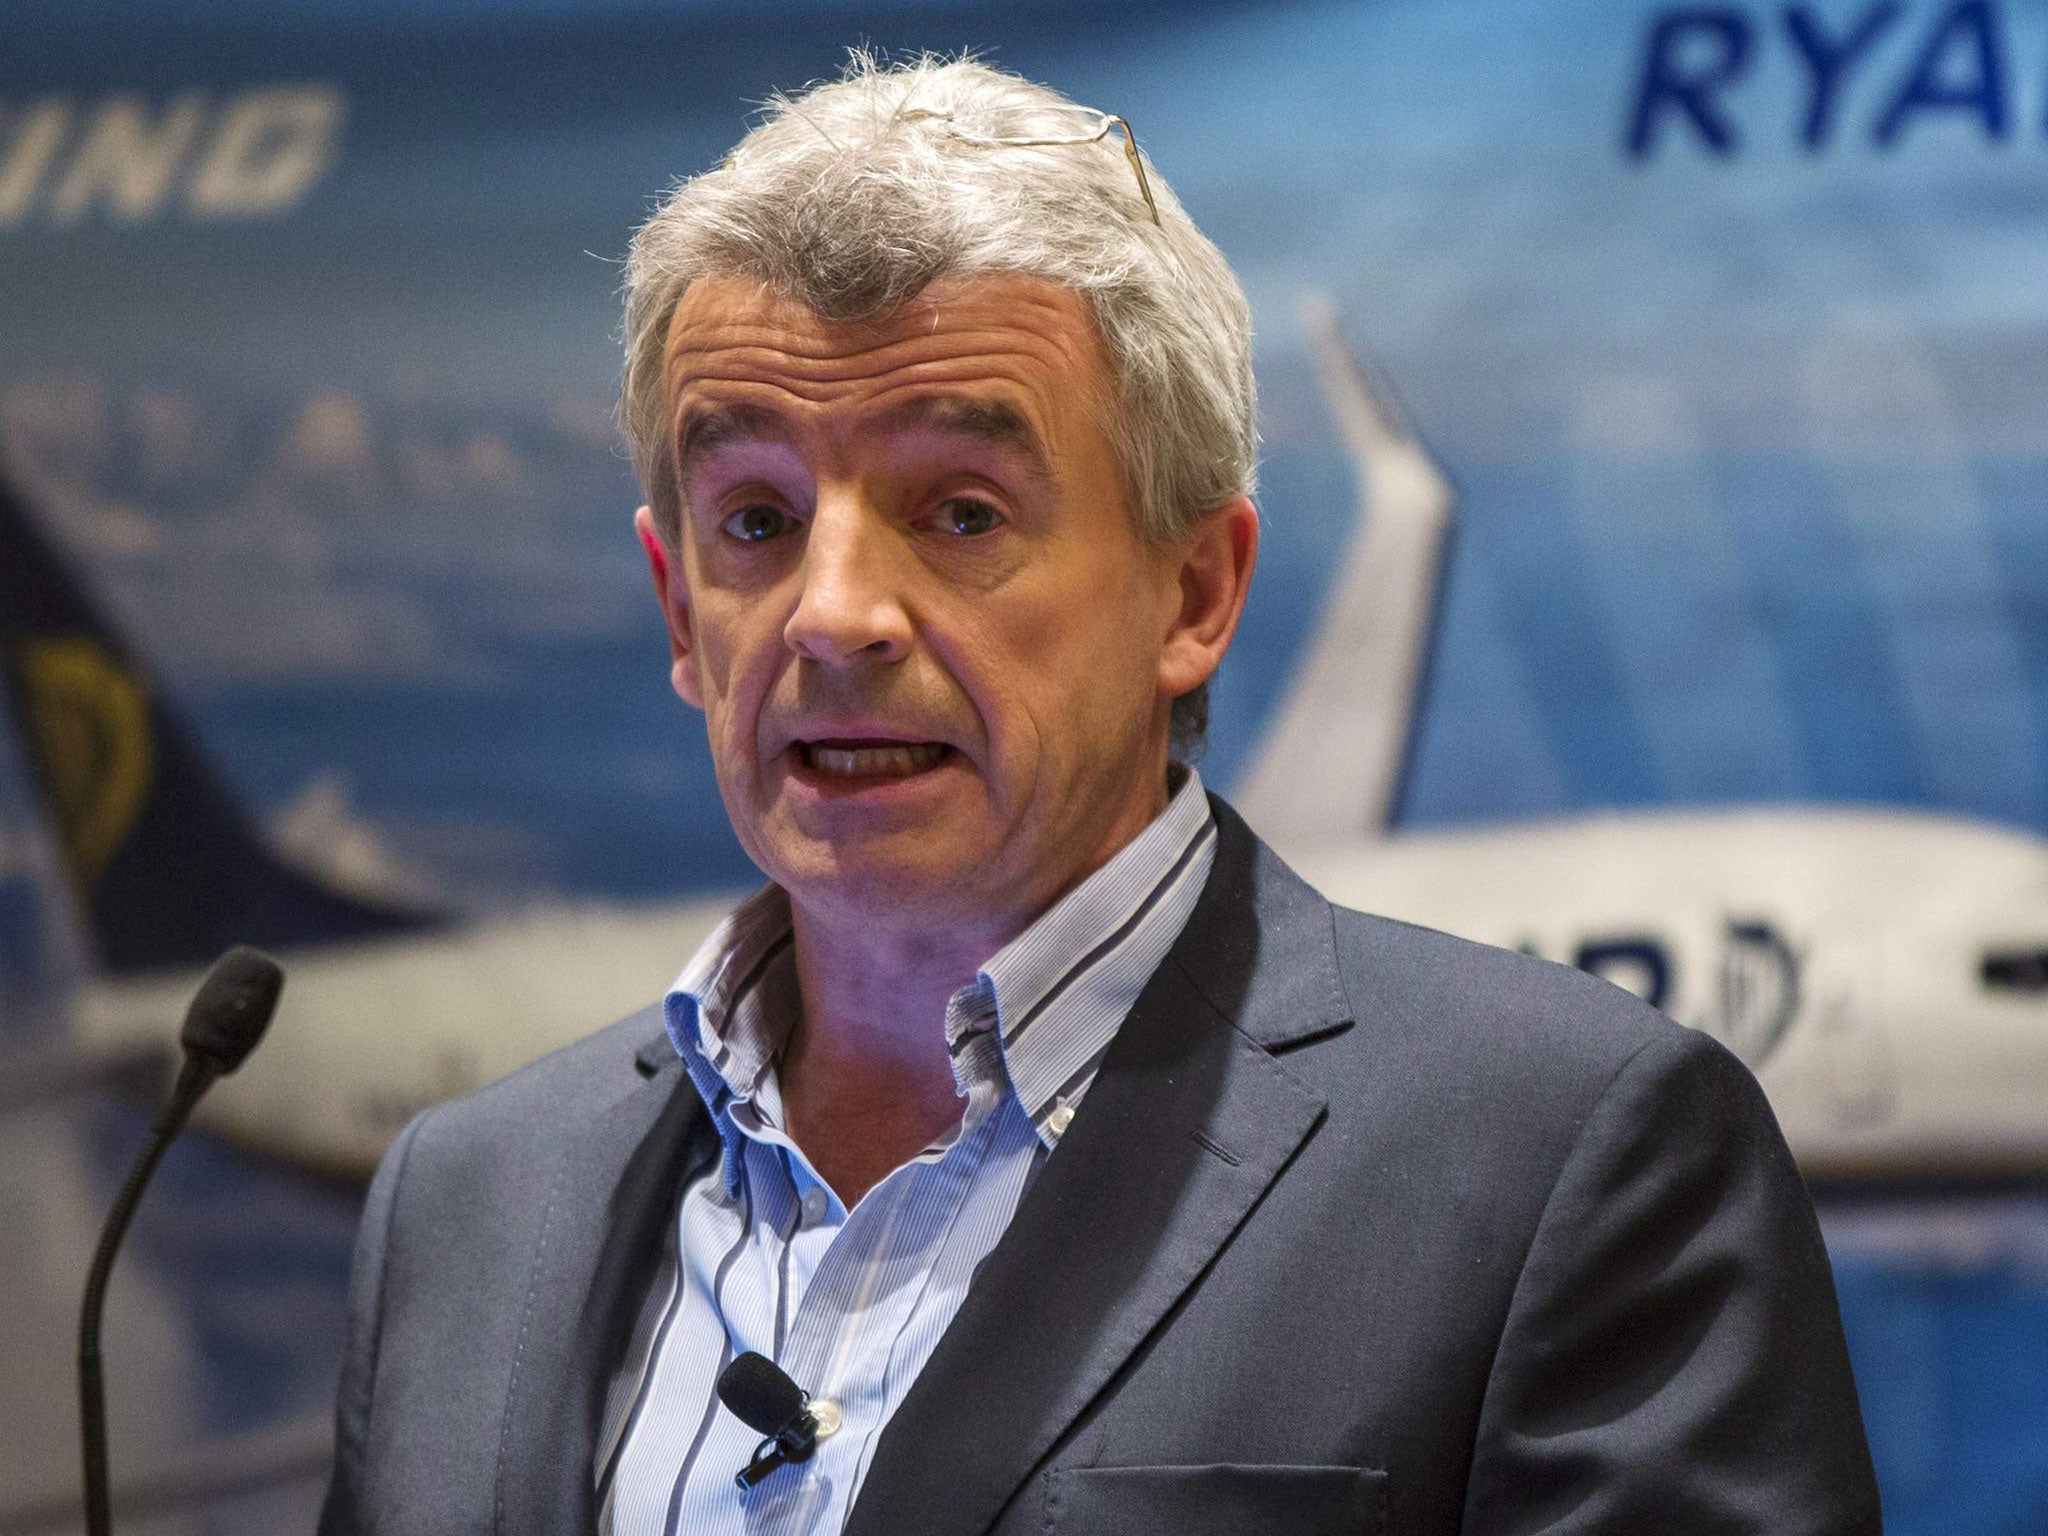 Michael O’Leary, chief executive of Ryanair